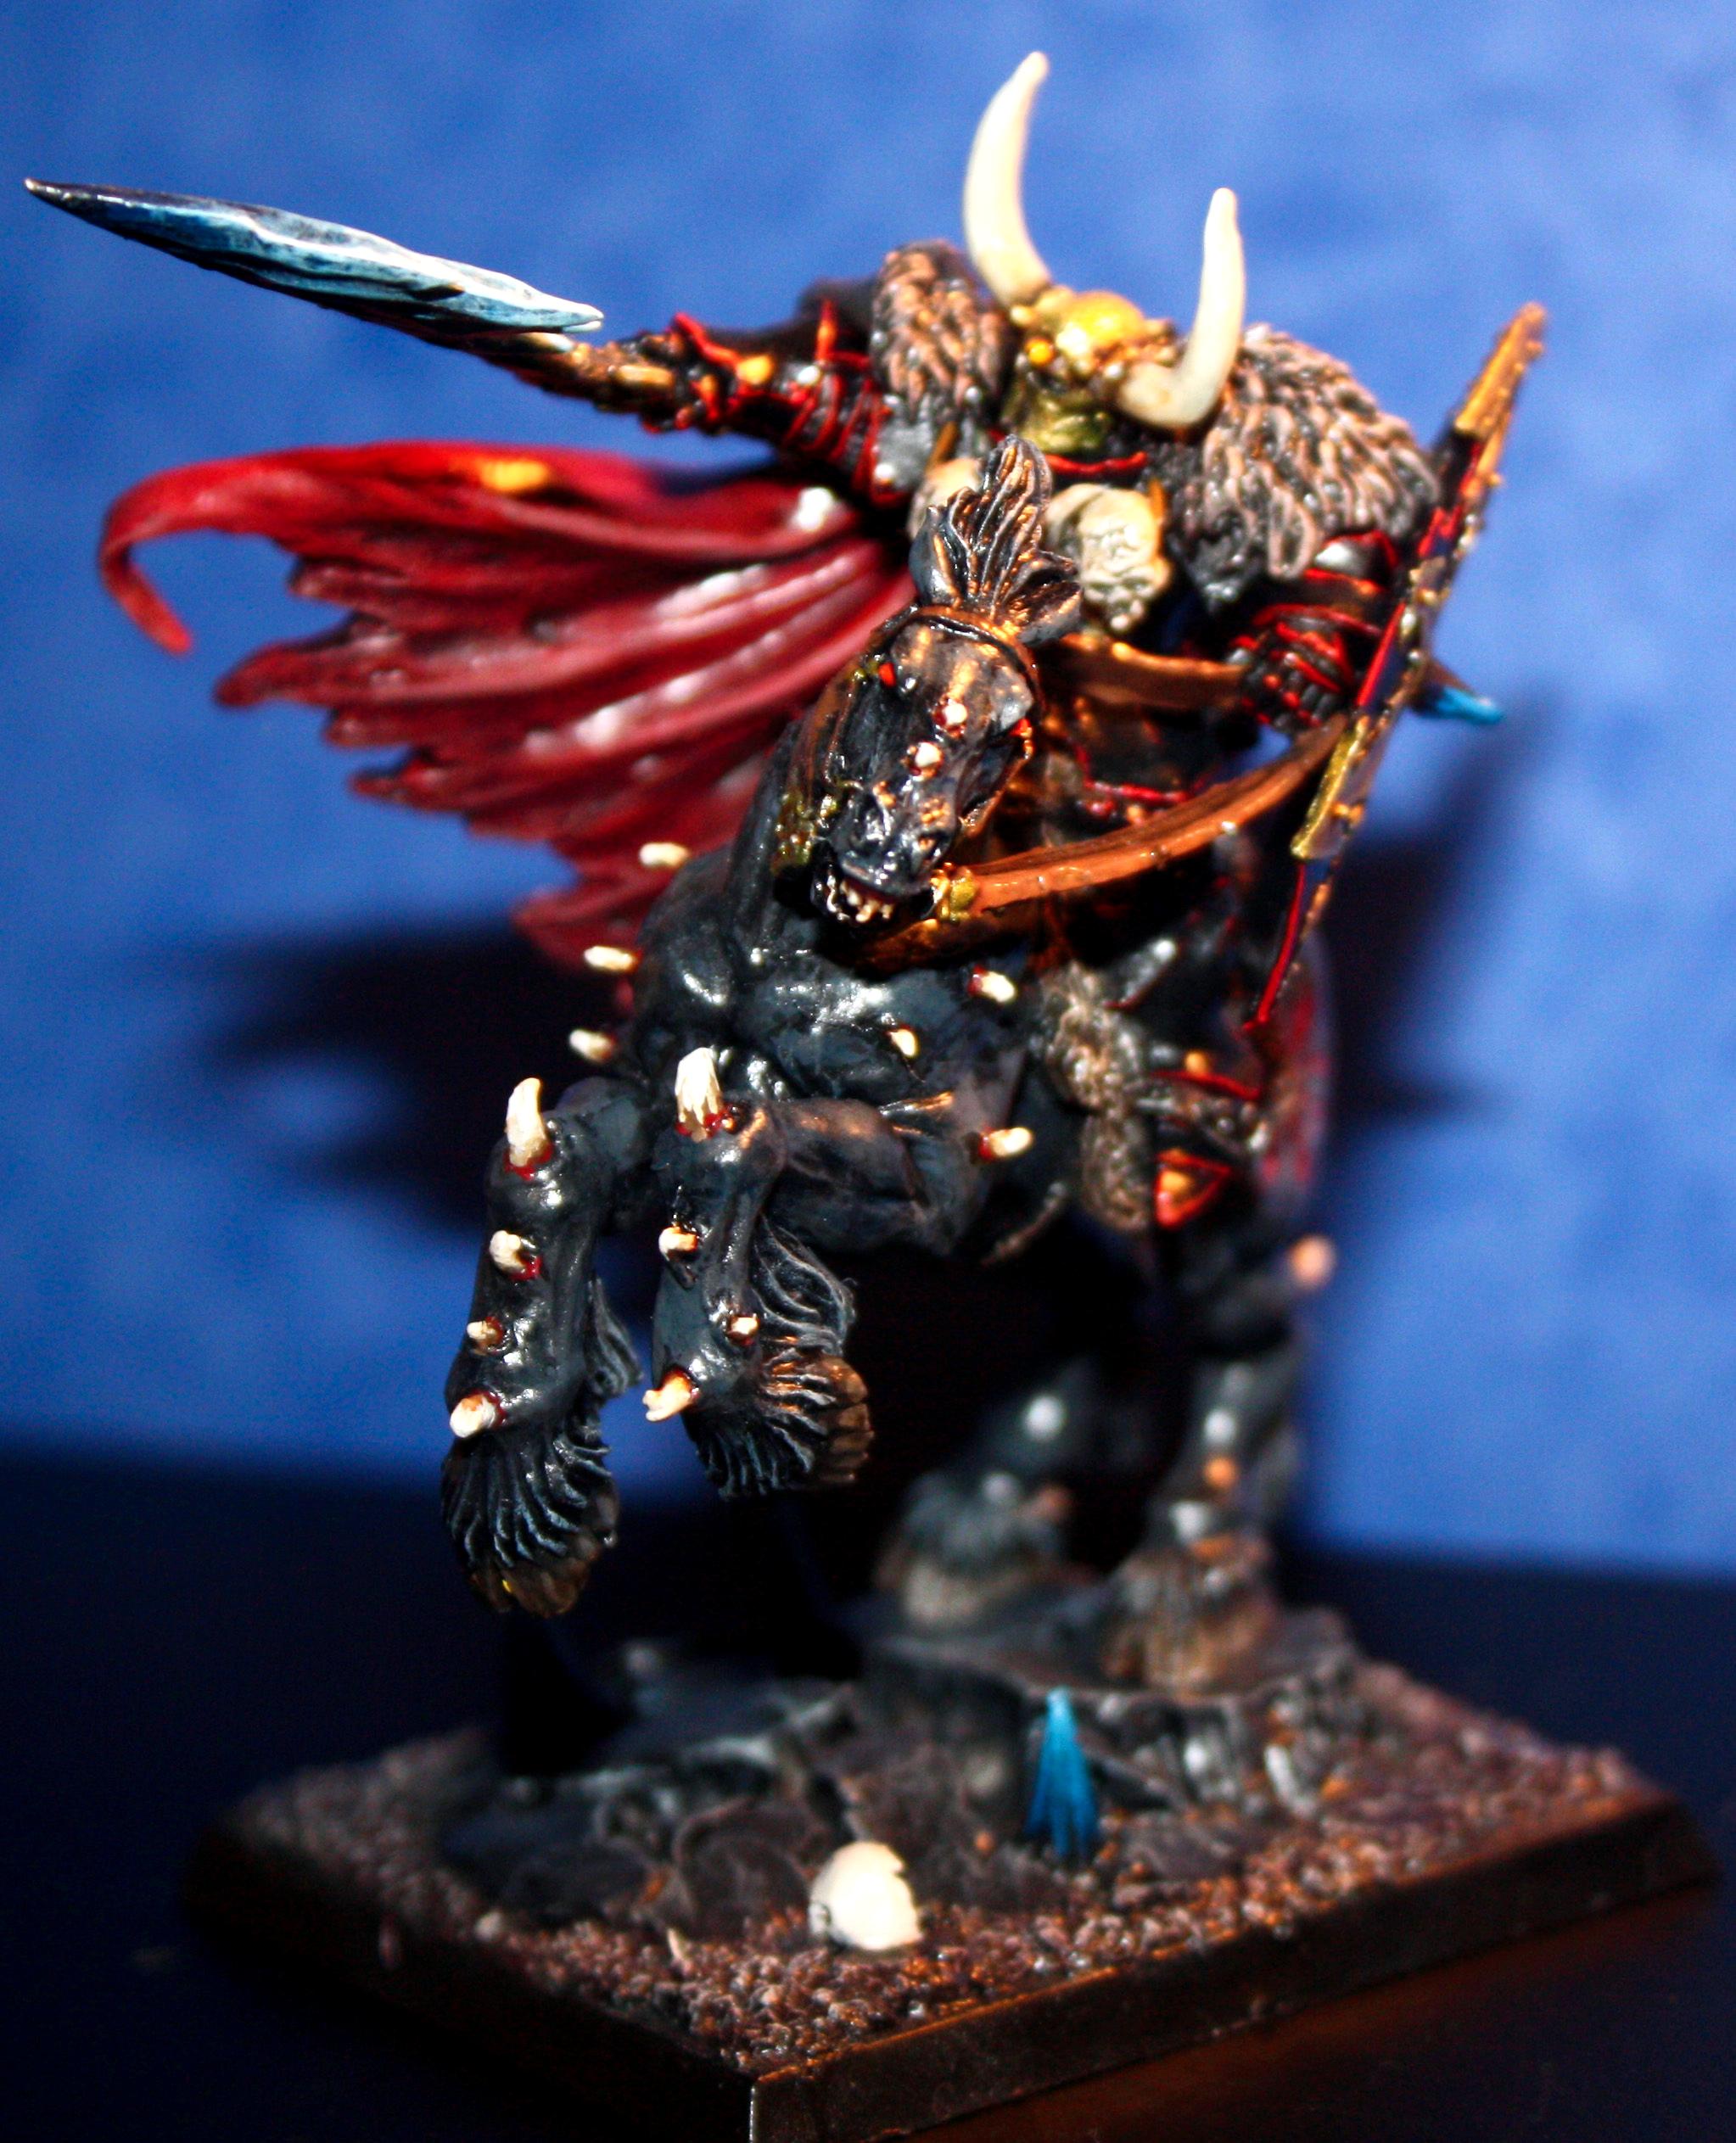 Chaos, Converting, End, Lord, Of, Sweden, The, Times, Warhammer Fantasy, Weaponswap